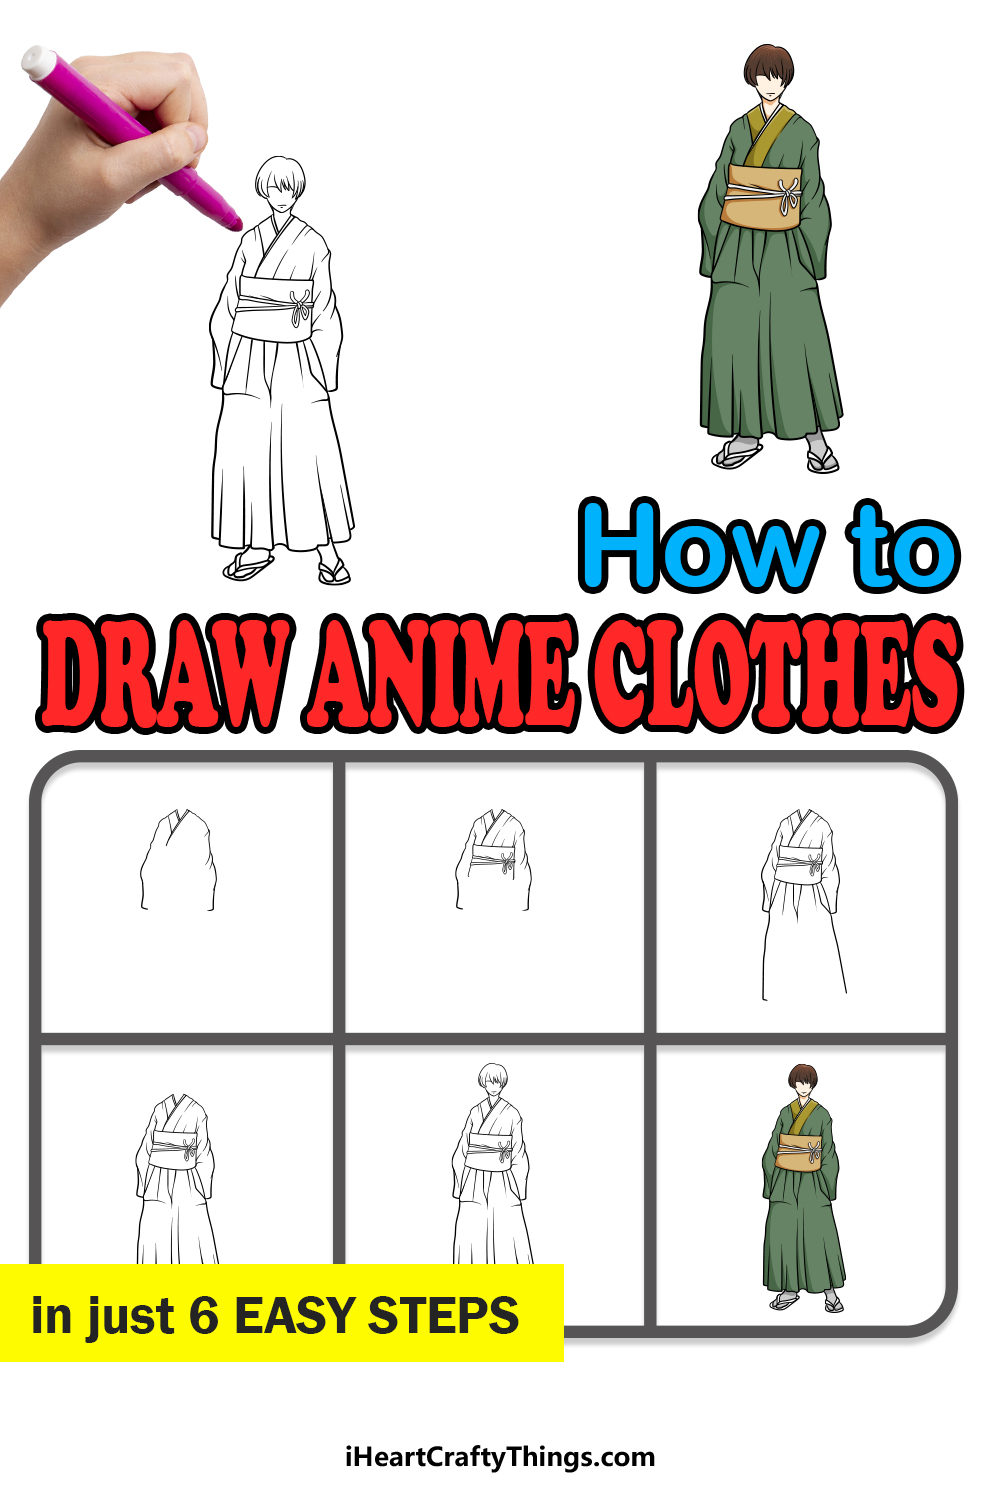 how to draw anime clothes in 6 easy steps